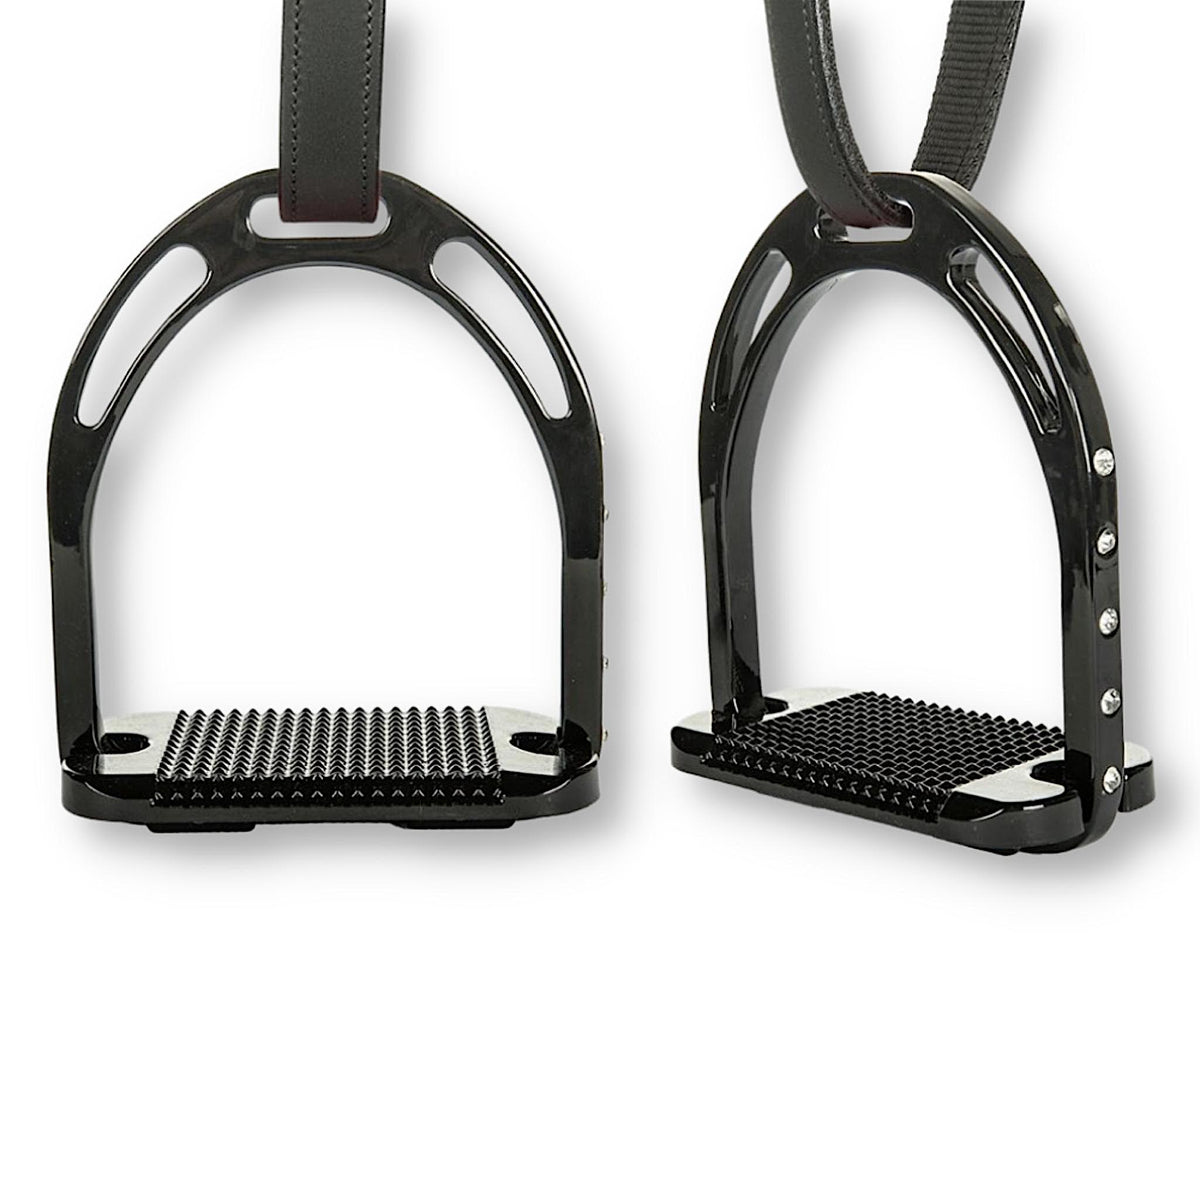 Two patent black stirrups with diamantes down side and grip tread.